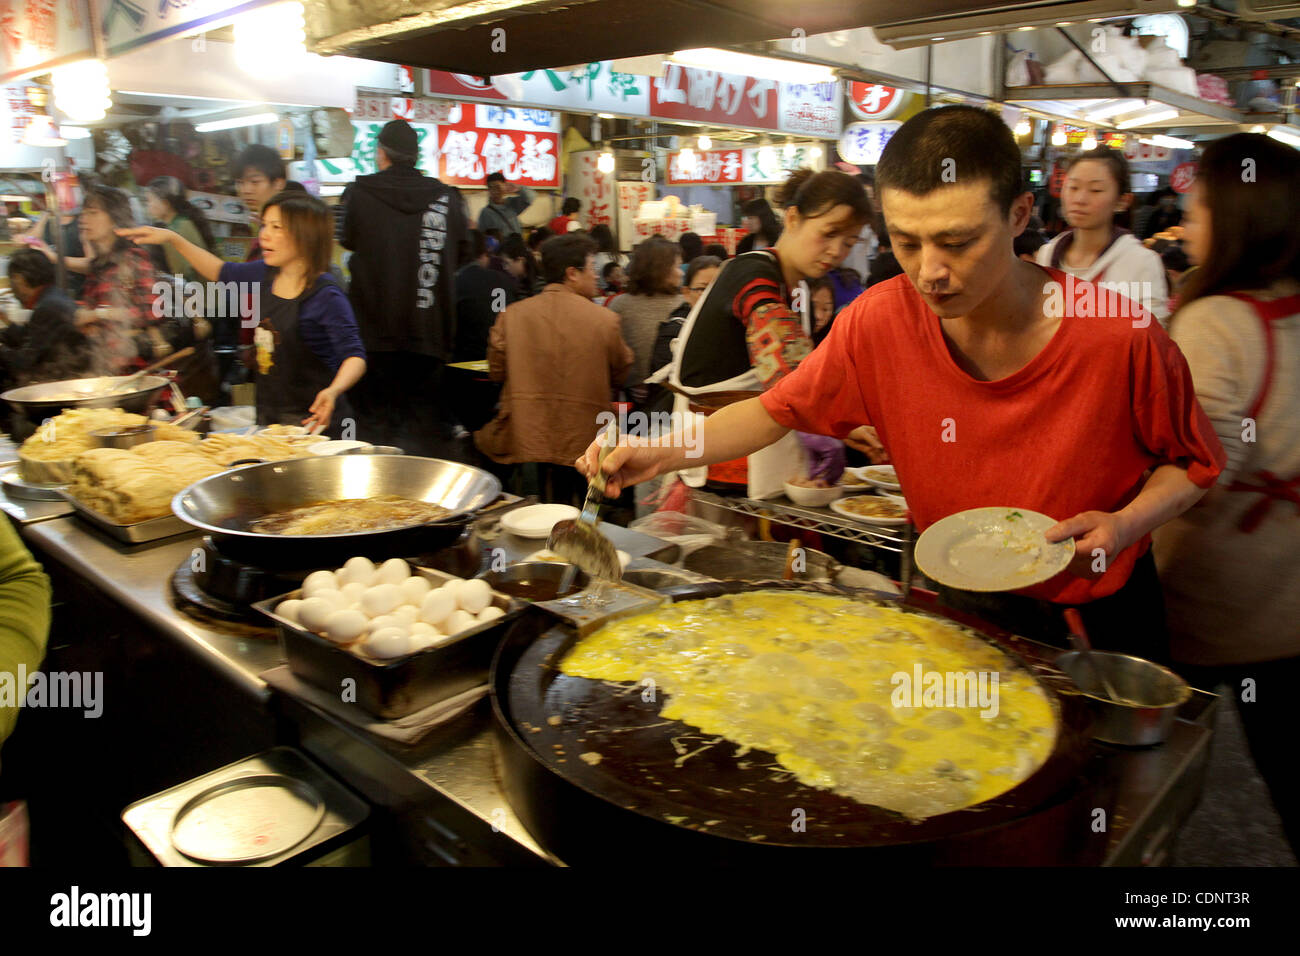 June 27, 2011 - Taipei, Taiwan - Oyster omelets are prepared at the Shilin Night Market.  The oyster omelet is a popular dish found at many night markets in Taiwan. (Credit Image: © Marcus Donner/ZUMAPRESS.com) Stock Photo